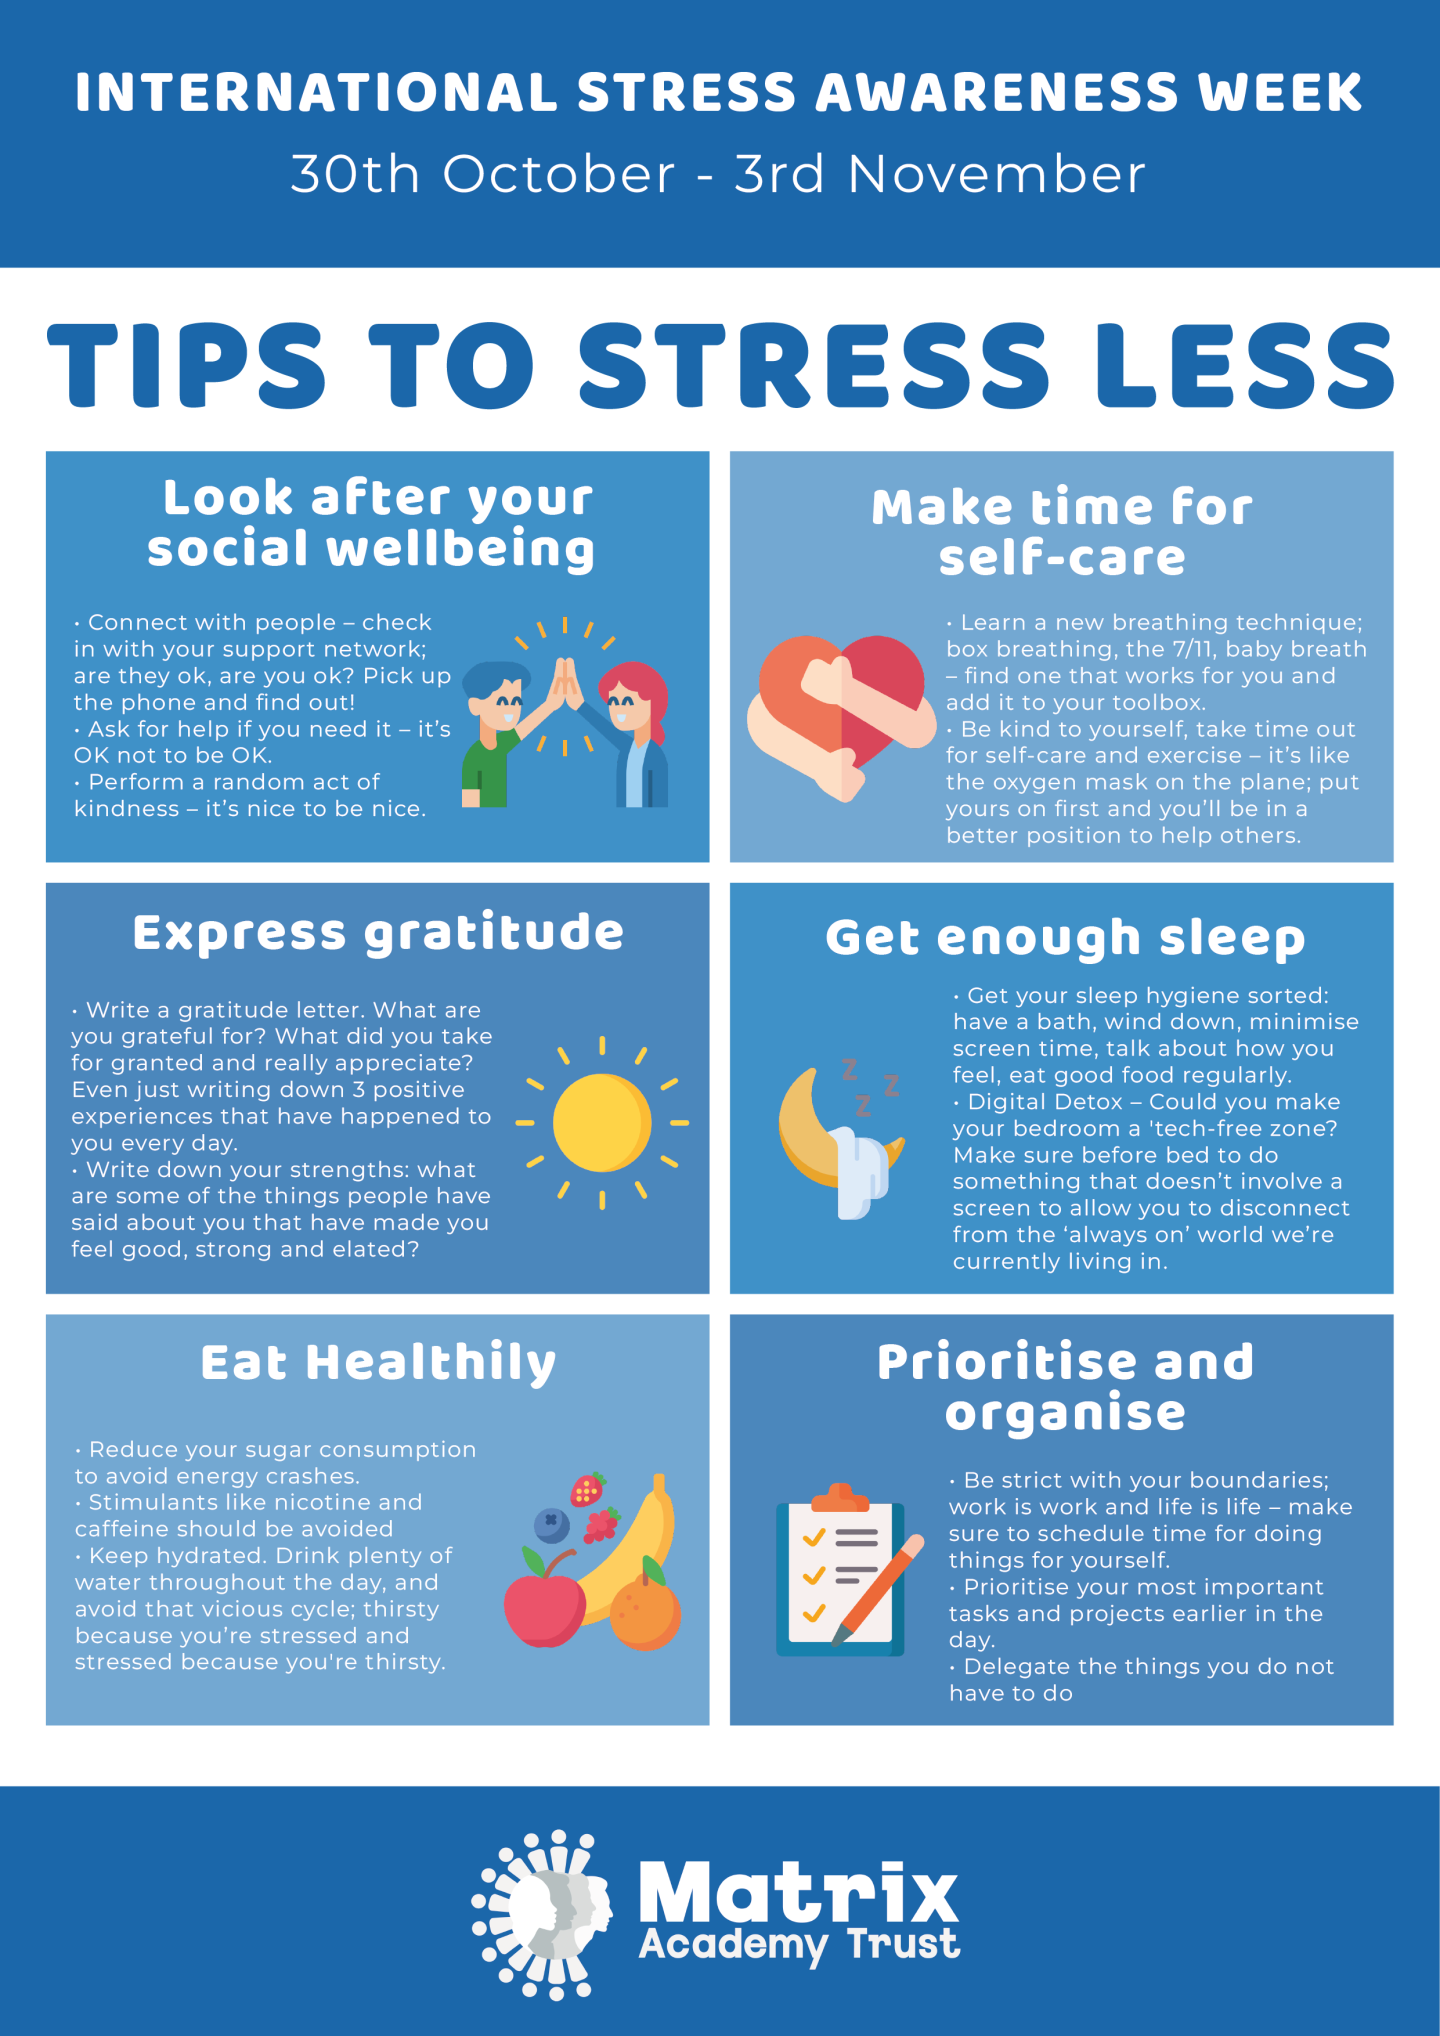 Tips-to-stress-less